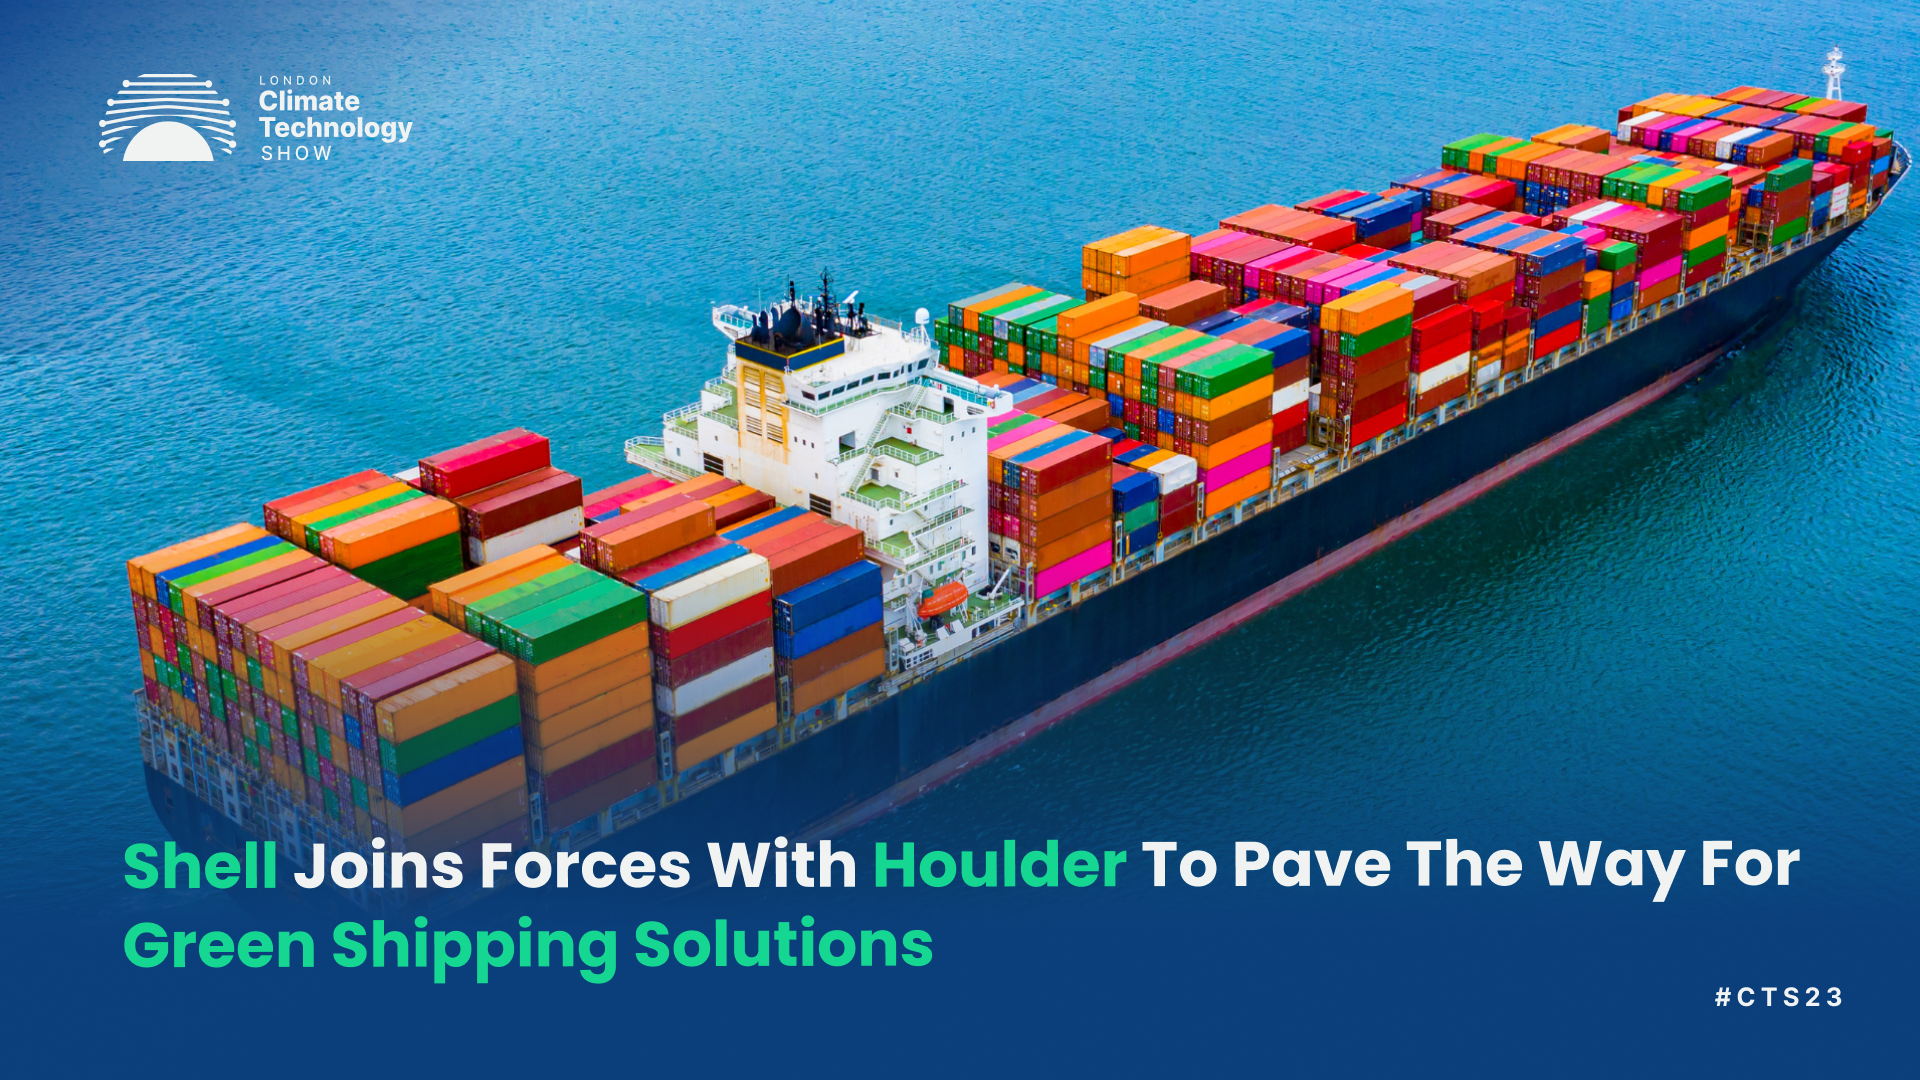 Shell Joins Forces With Houlder To Pave The Way For Green Shipping Solutions